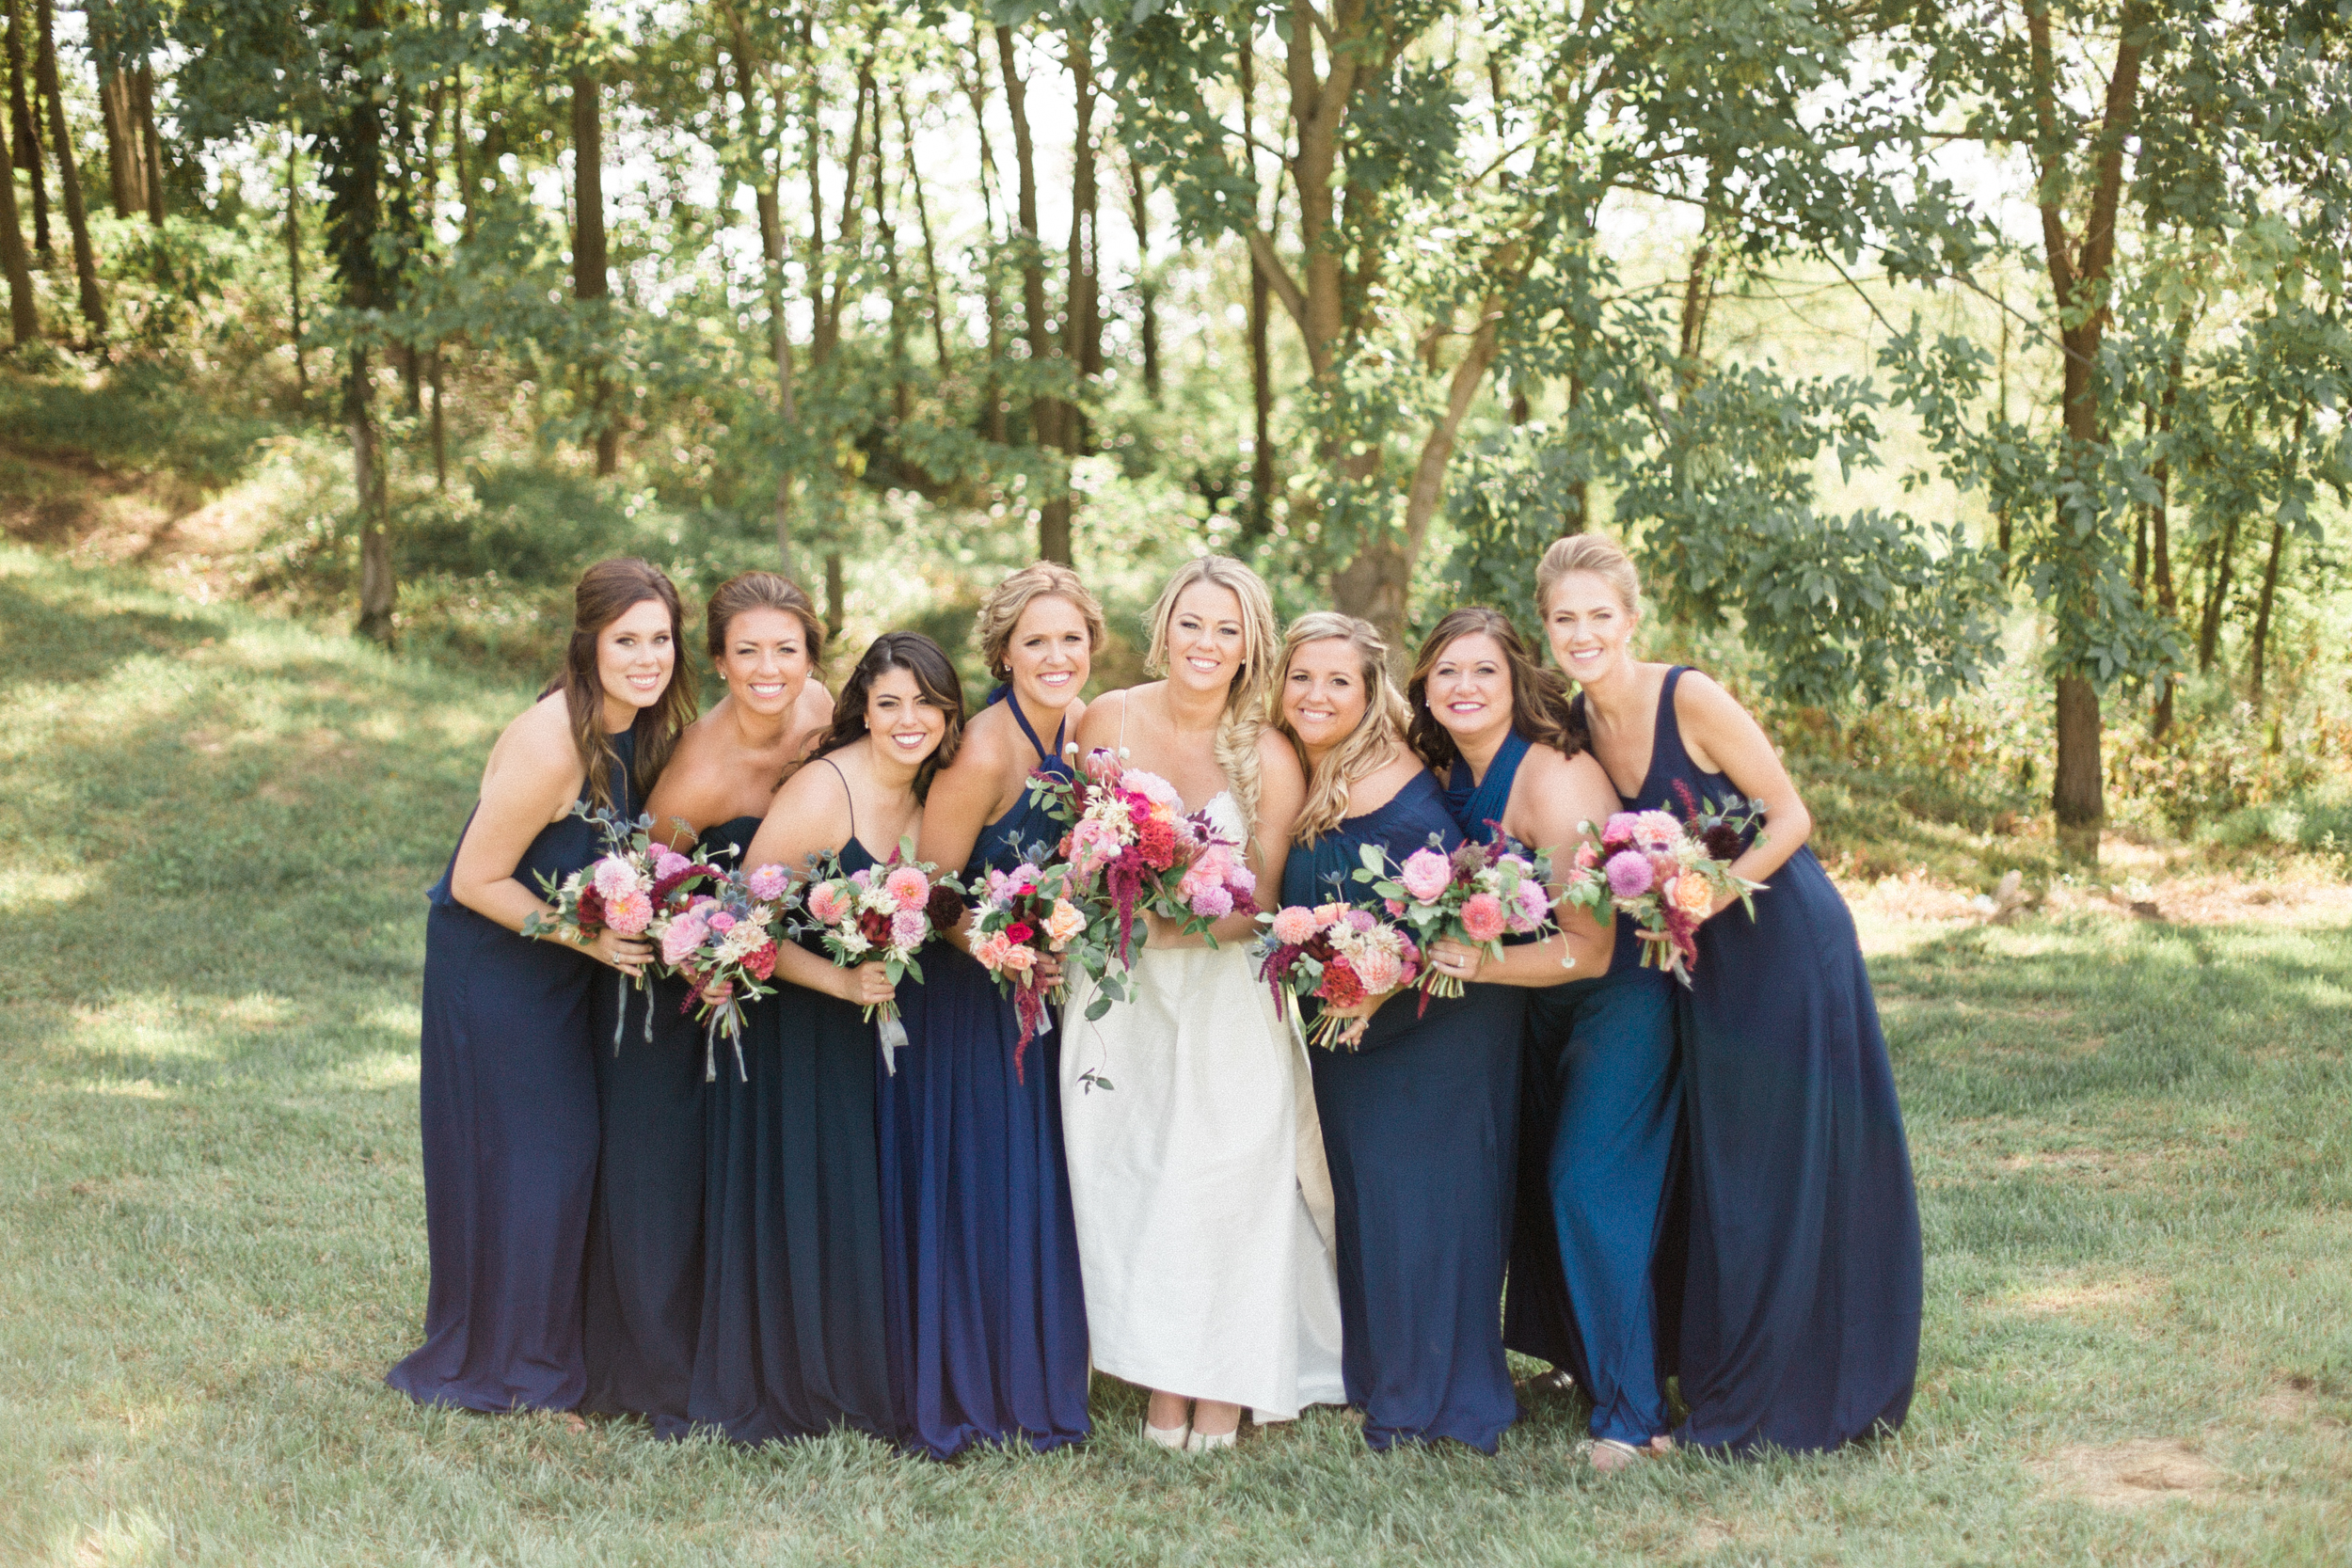 Bridesmaids in navy. Photographed by Morgan Williams Photography.